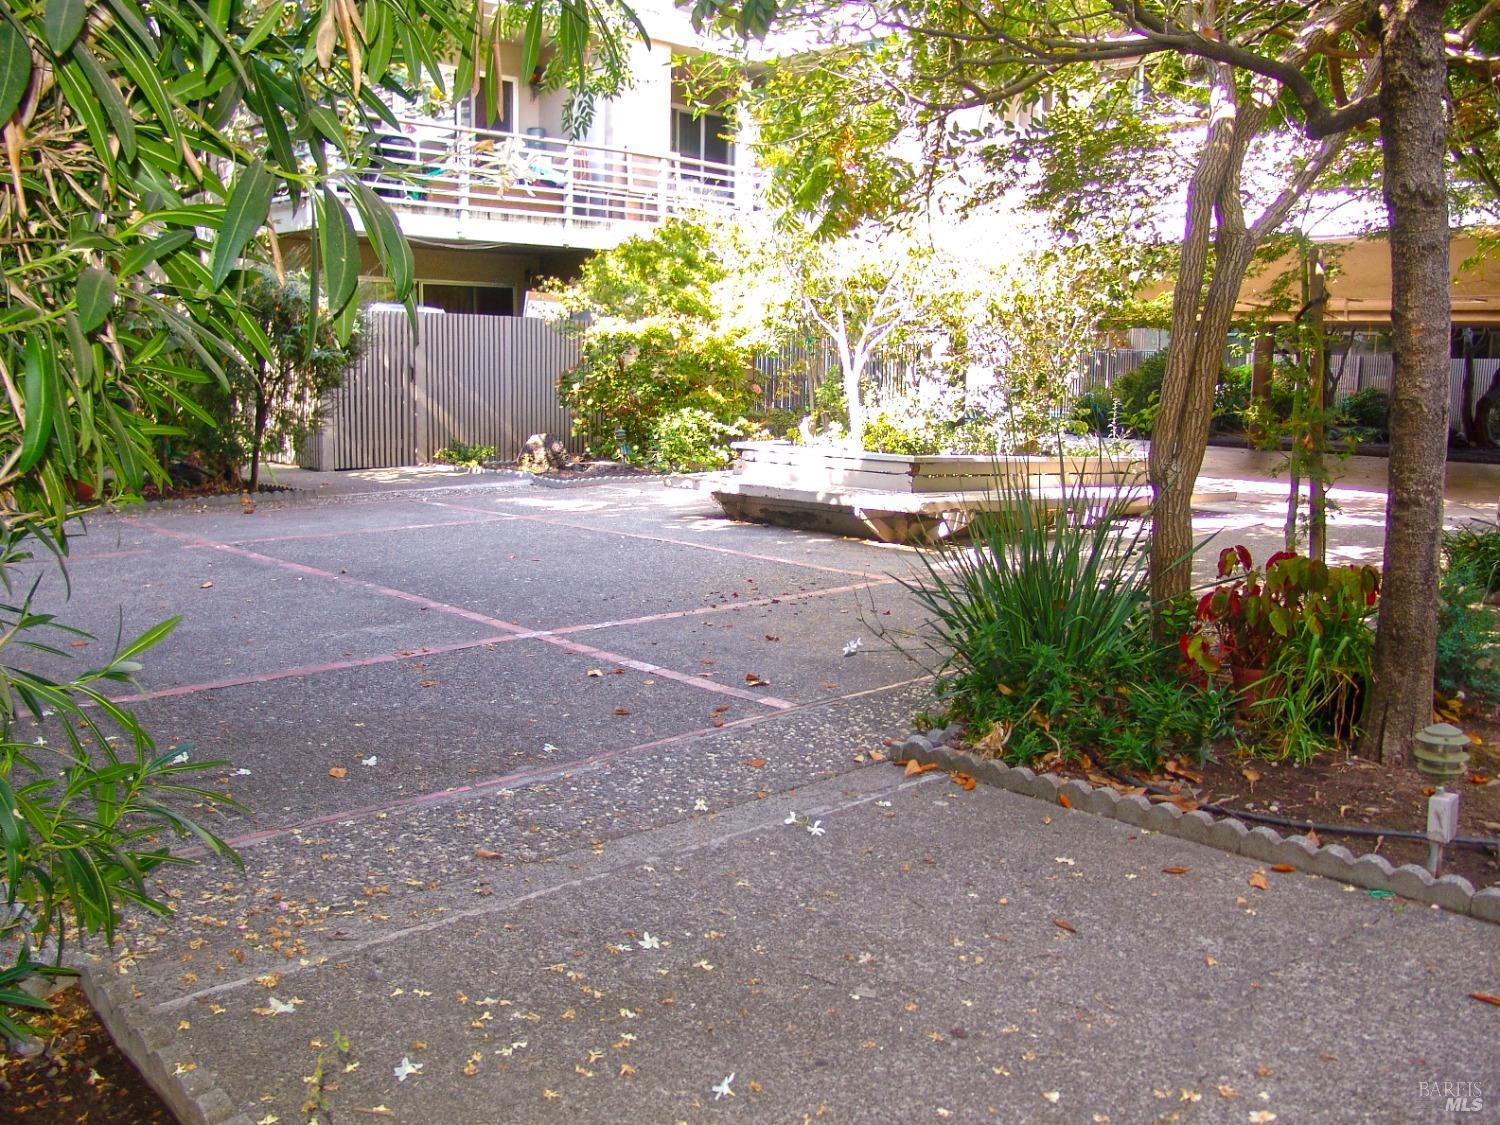 a view of outdoor space and yard